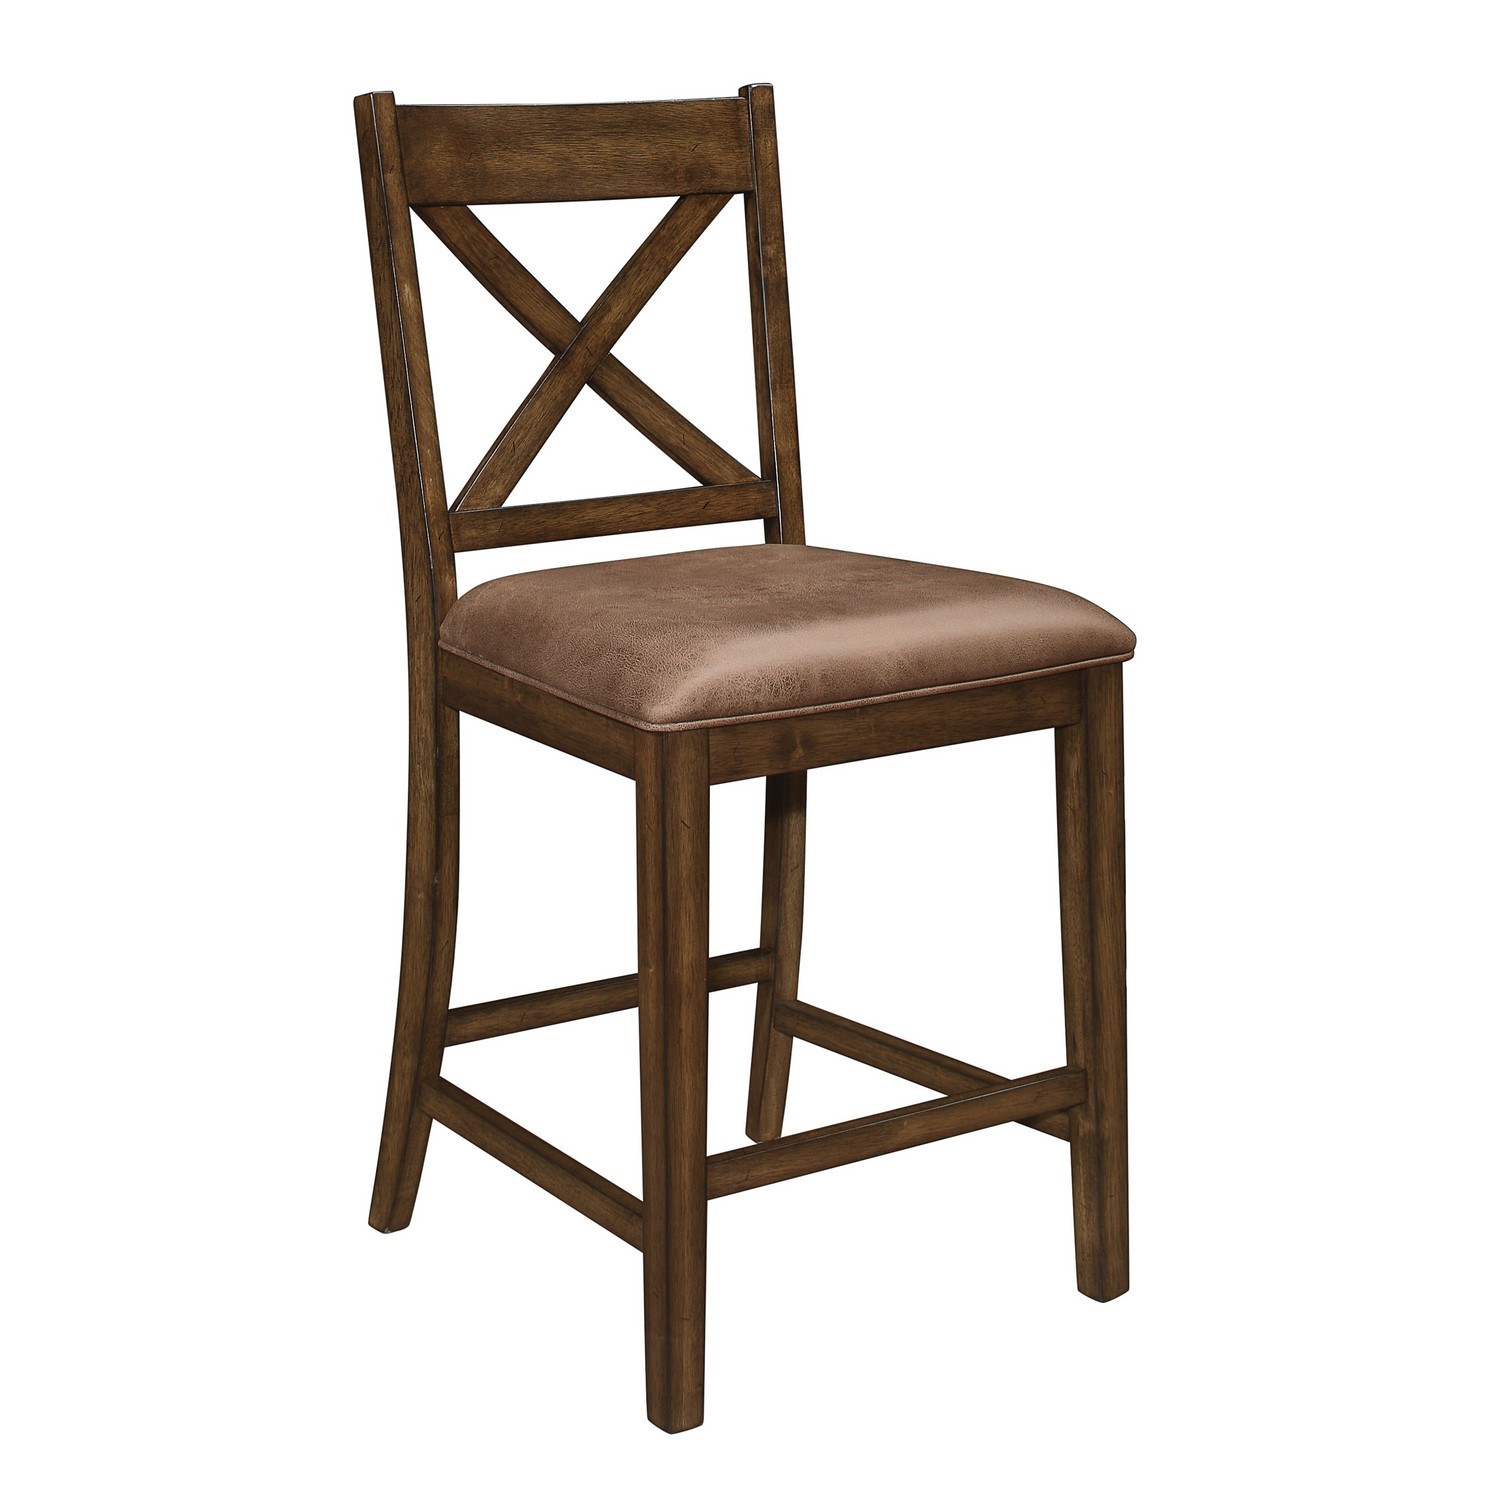 Homelegance Levittown Counter Height Chair - Brown